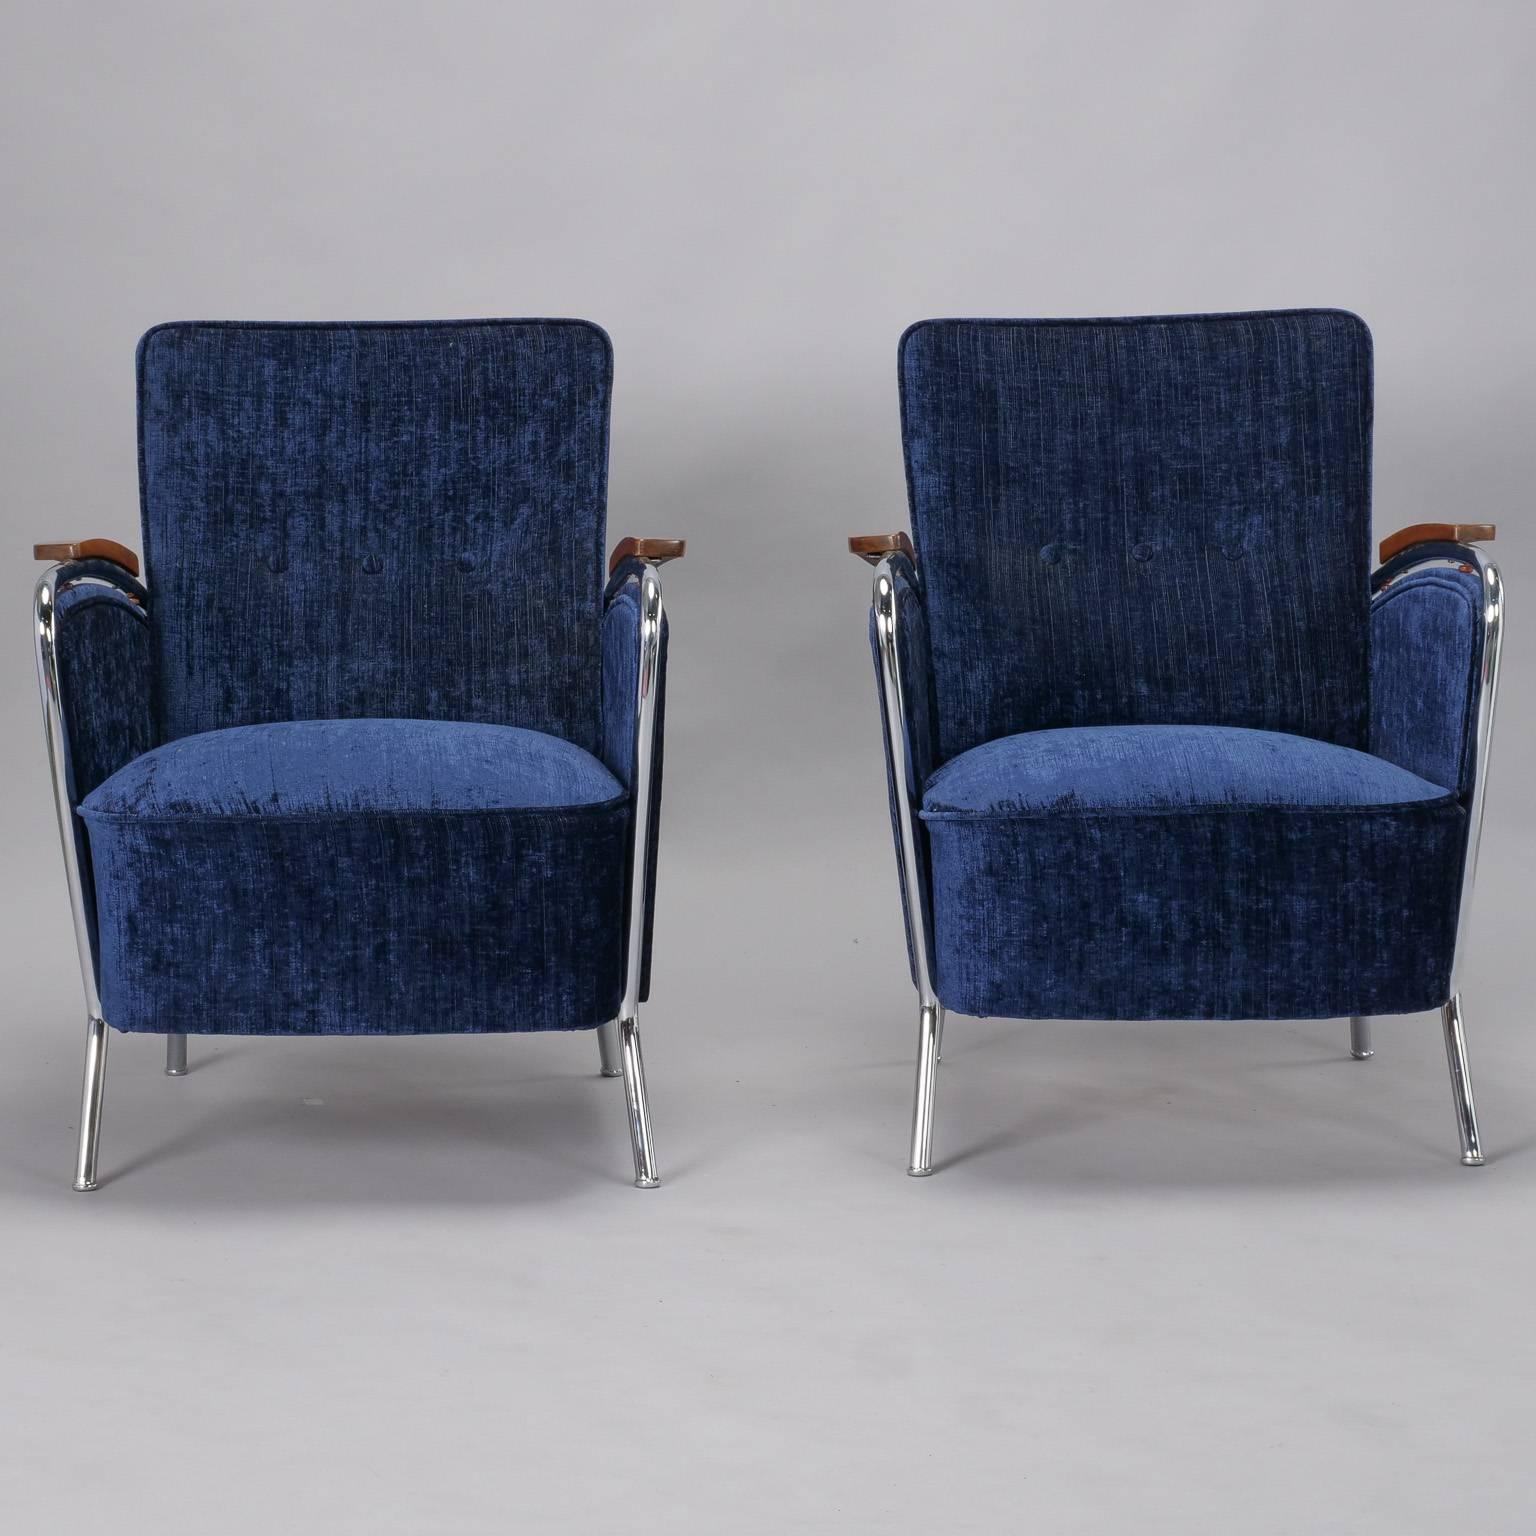 Pair of Bauhaus armchairs have a curvy polished steel frame, wood accented arm rests and have been recently upholstered in blue chenille, circa 1930s. Unknown maker. Measure: Seats are 18.5” high and 20.5” deep. Sold and priced as a pair.